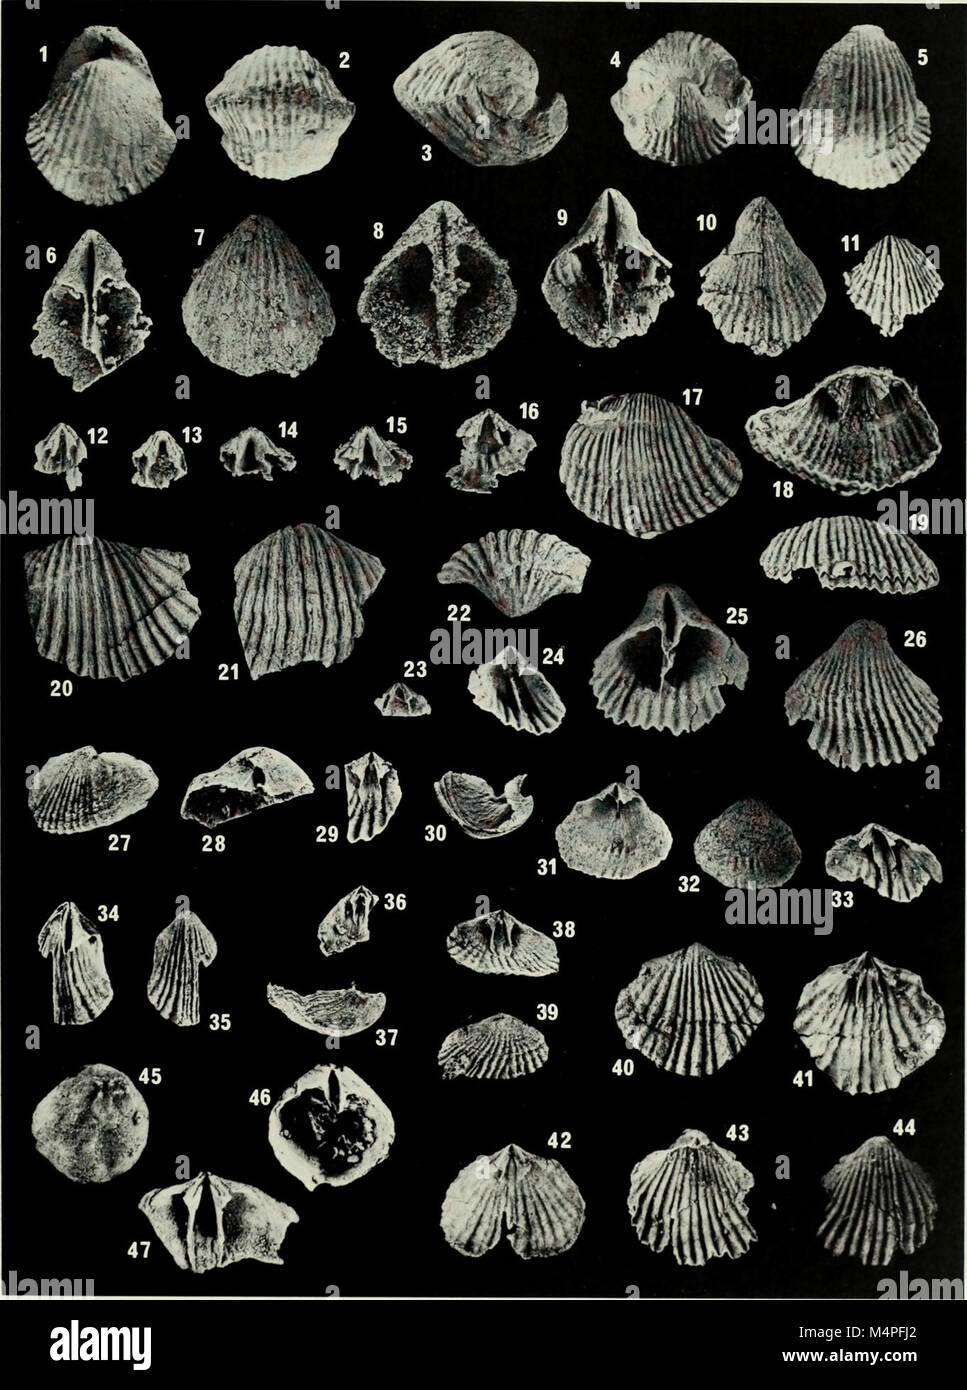 Brachiopoda and biostratigraphy of the Silurian-Devonian Delorme Formation in the District of Mackenzie, the Yukon (1984) (20220727929) Stock Photo